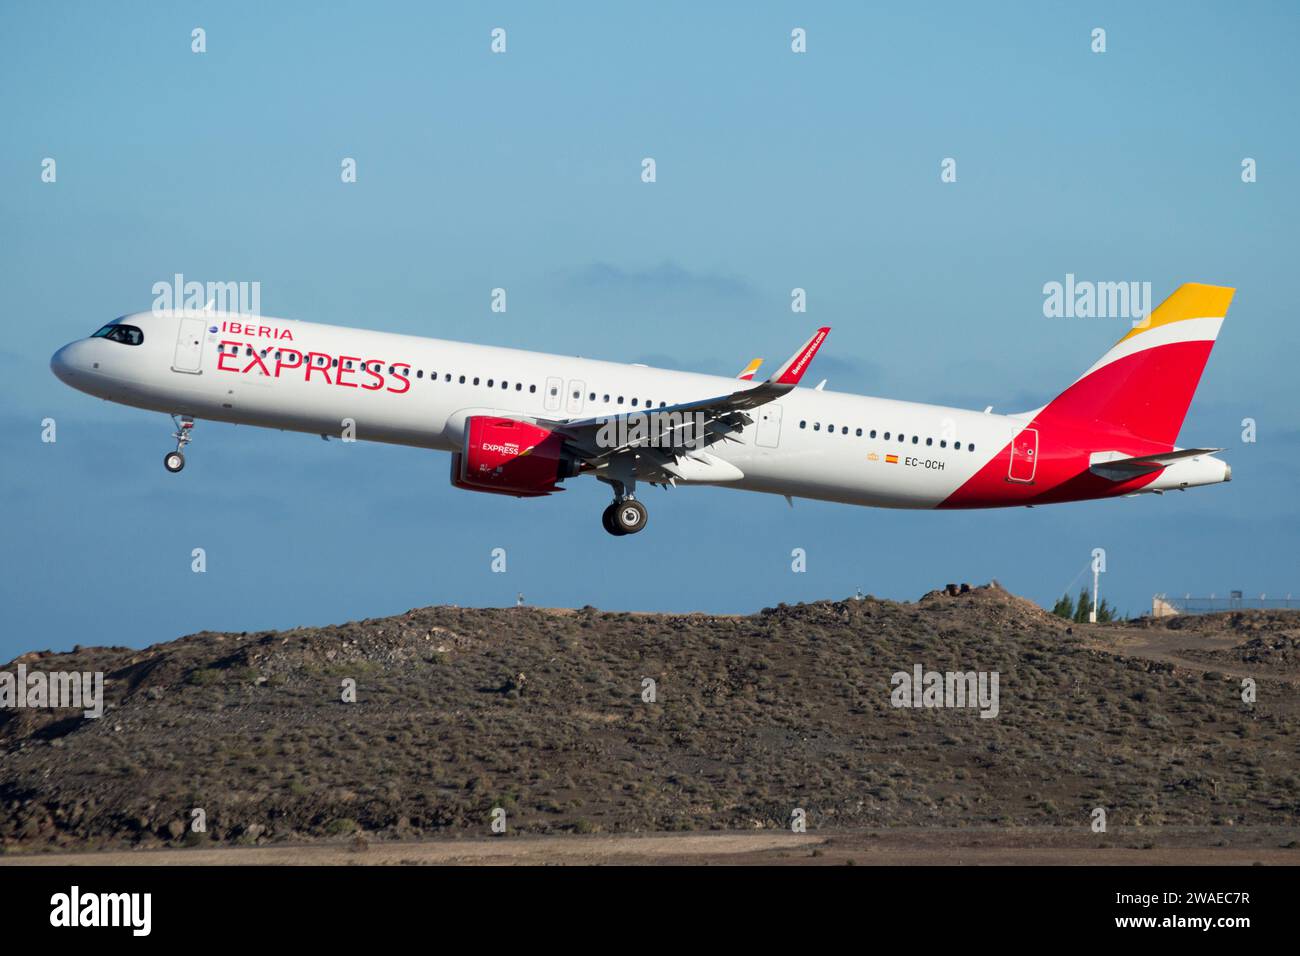 Airbus A321 neo airliner of the Iberia Express airline Stock Photo